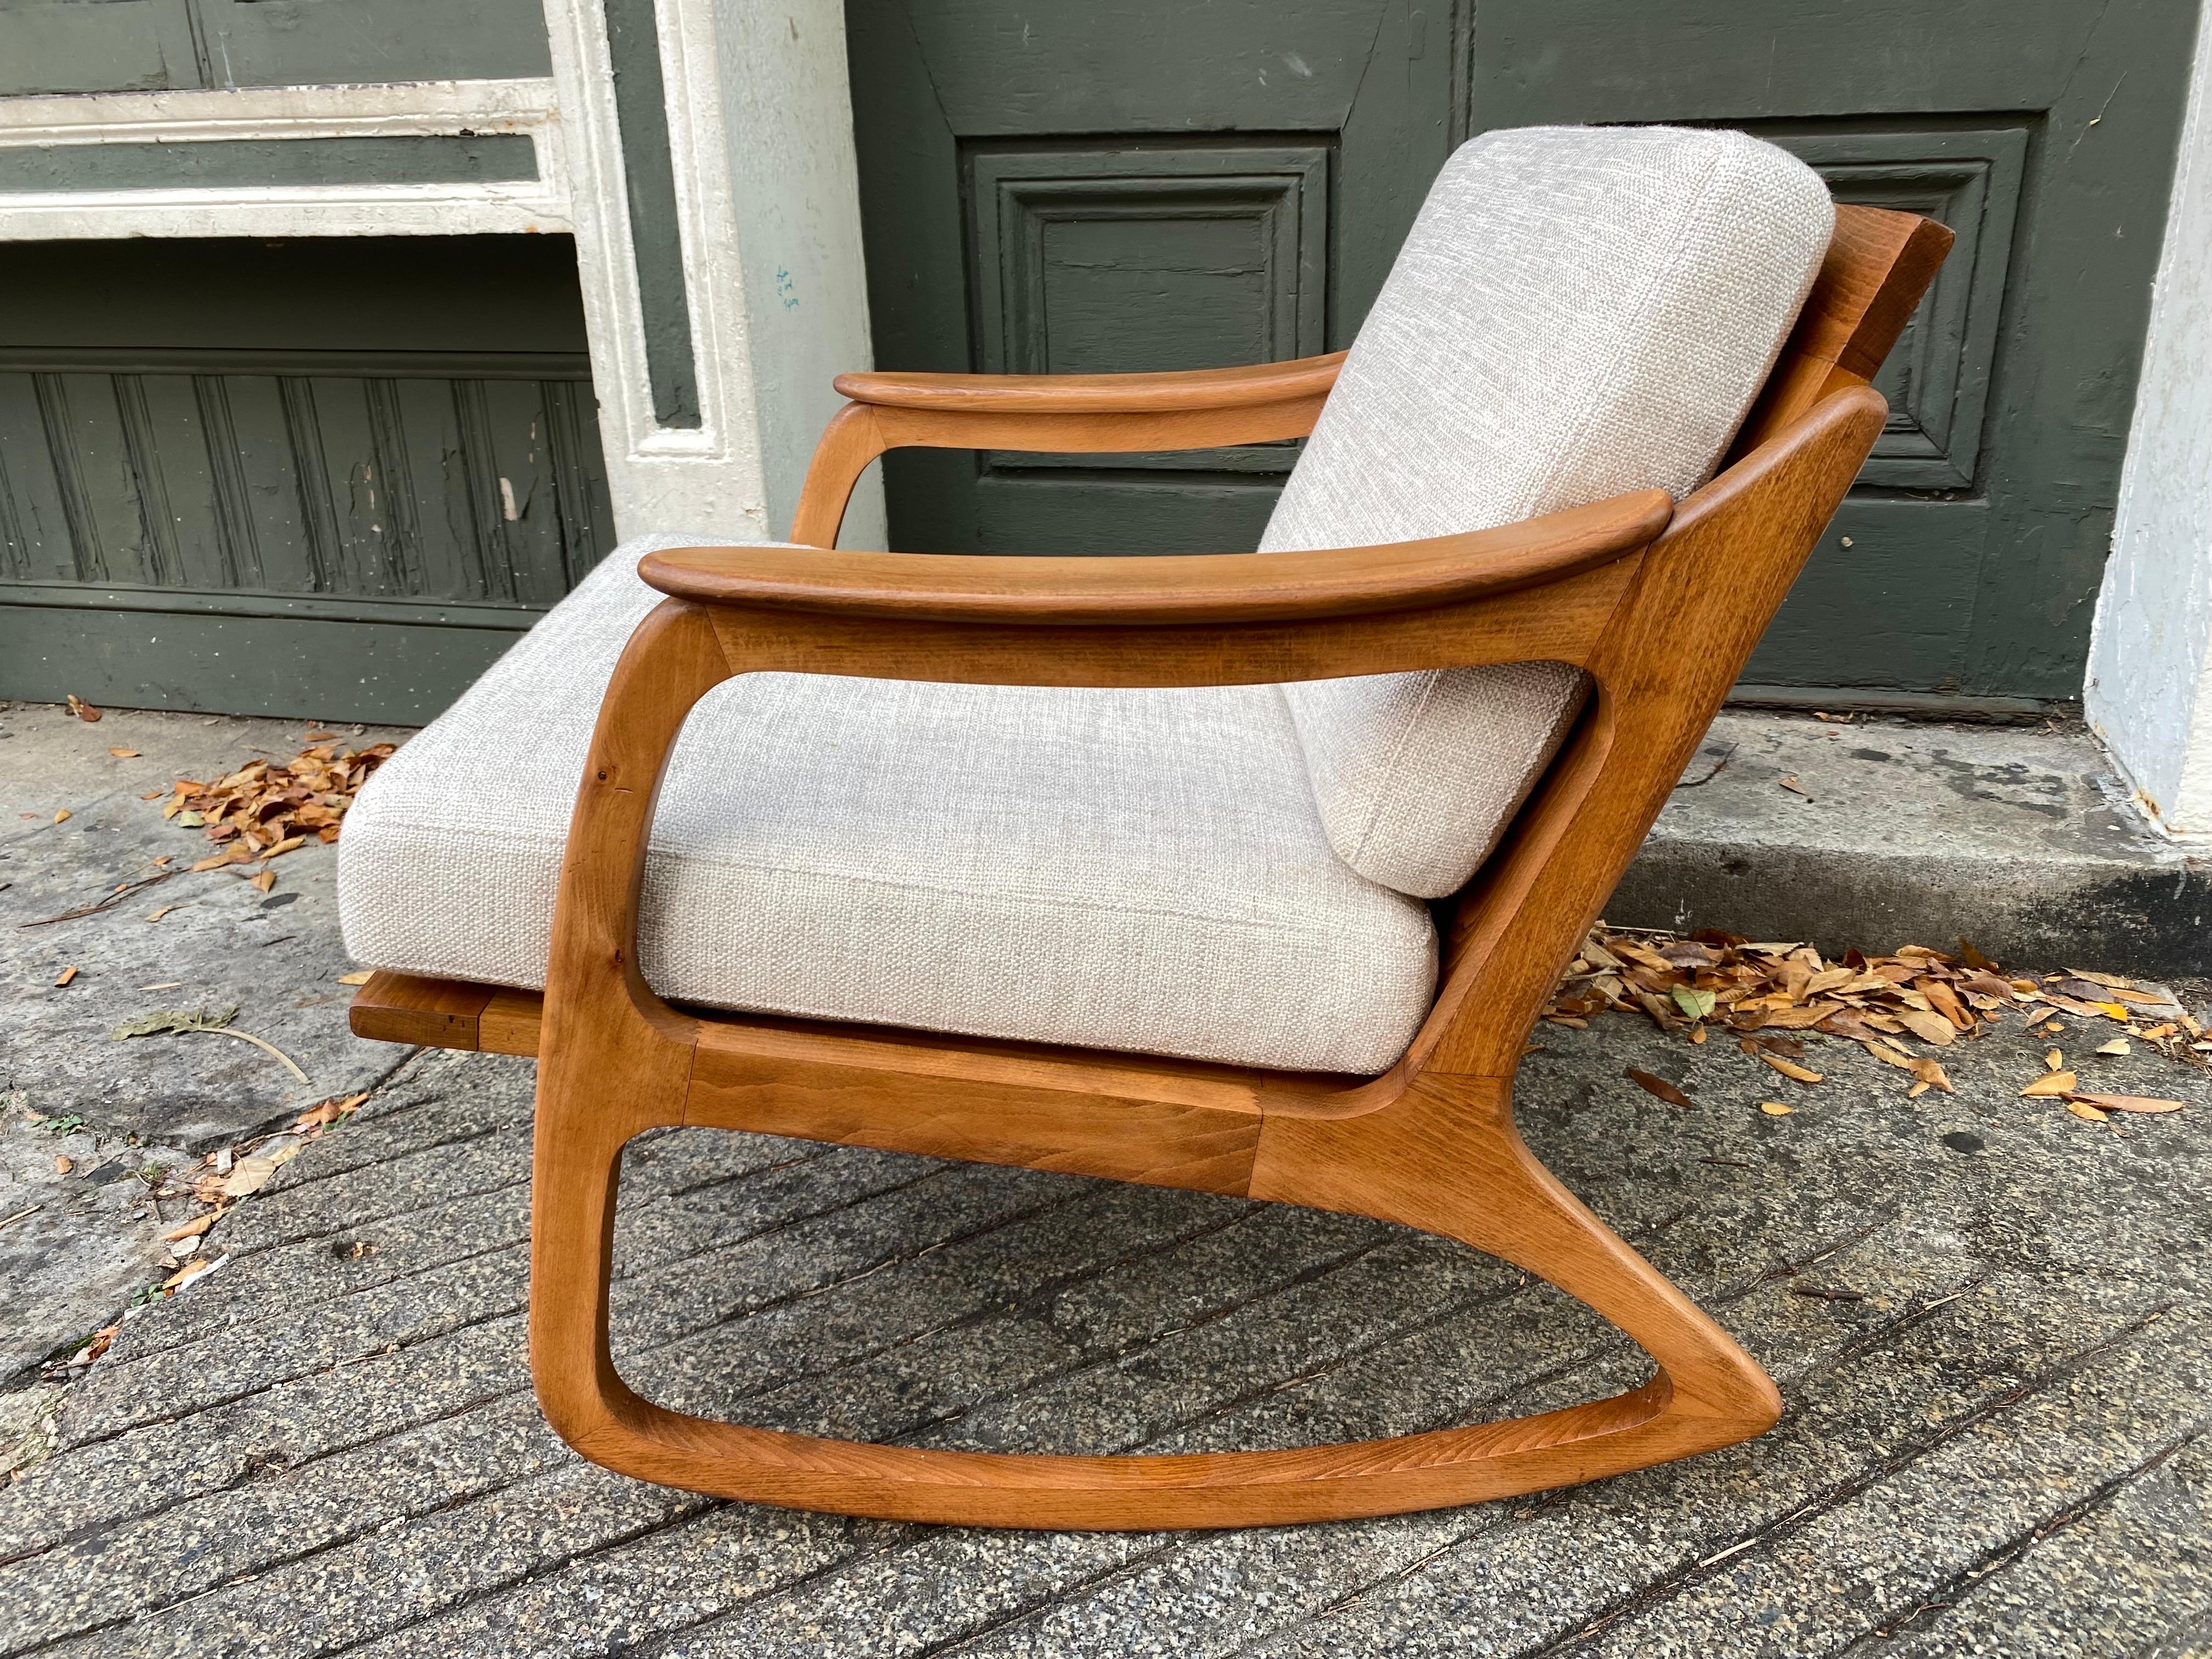 Lawrence Peabody Walnut Rocker.  Danish inspired with a beautiful caned back panel.  New upholstery and wood all refinished with new straps.  Comfortable roomy Rocker with tons of style and personality!